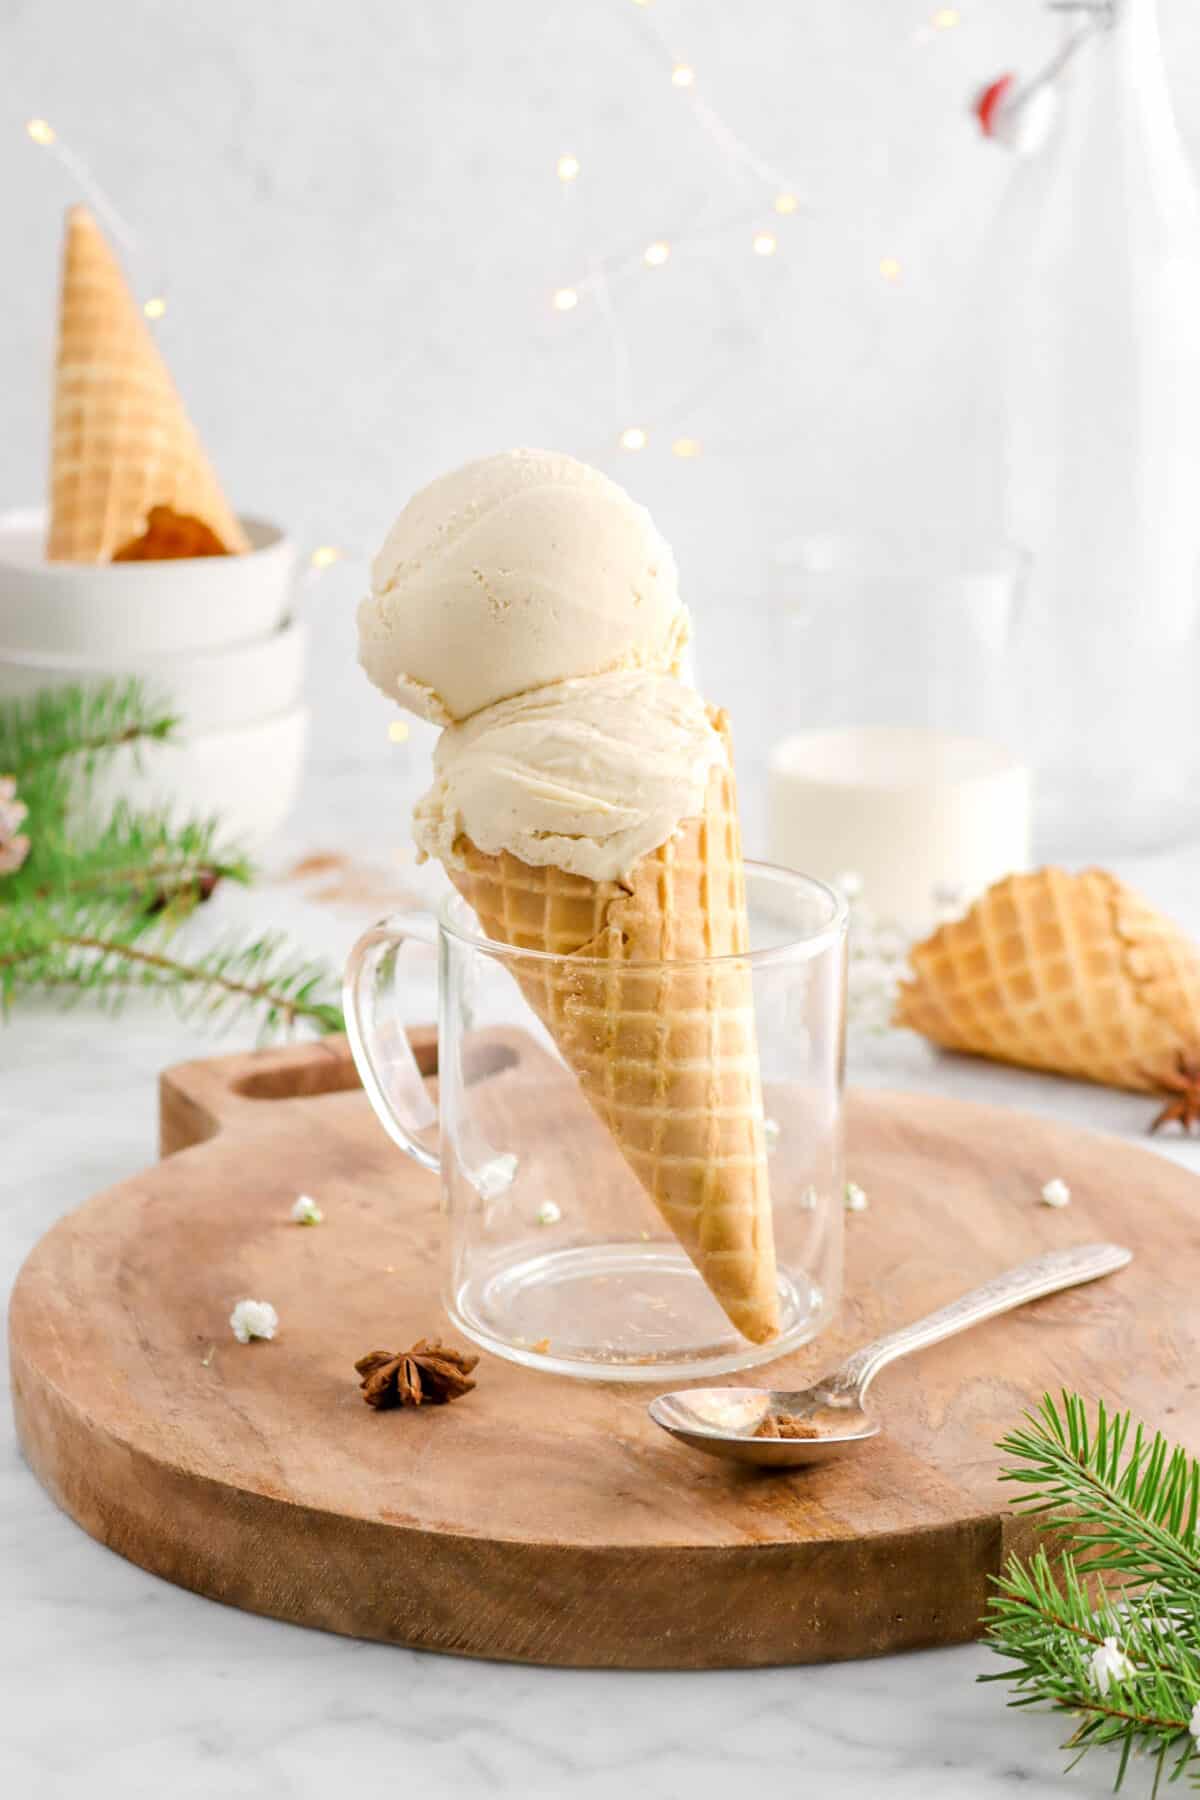 tilted cone with eggnog ice cream on wood serving board with spoon, star anise pod, pine branches, bowls, and mug of eggnog behind